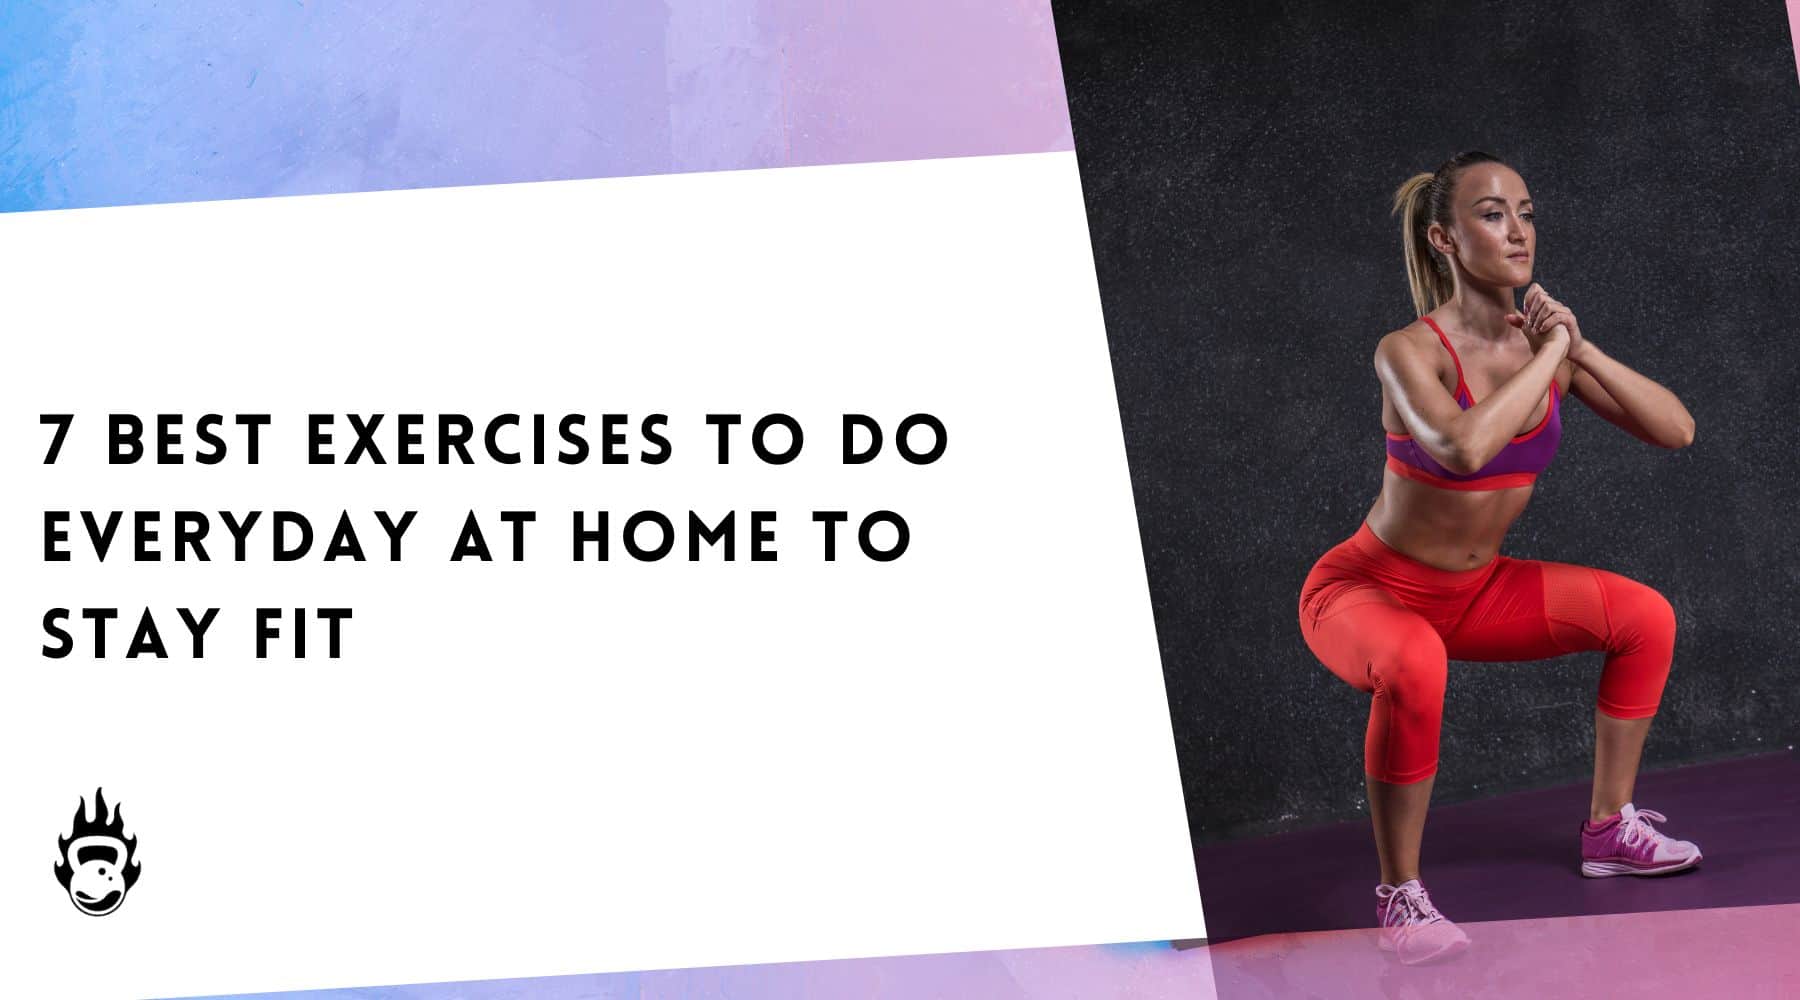 7 Best Exercises To Do Everyday At Home To Stay Fit